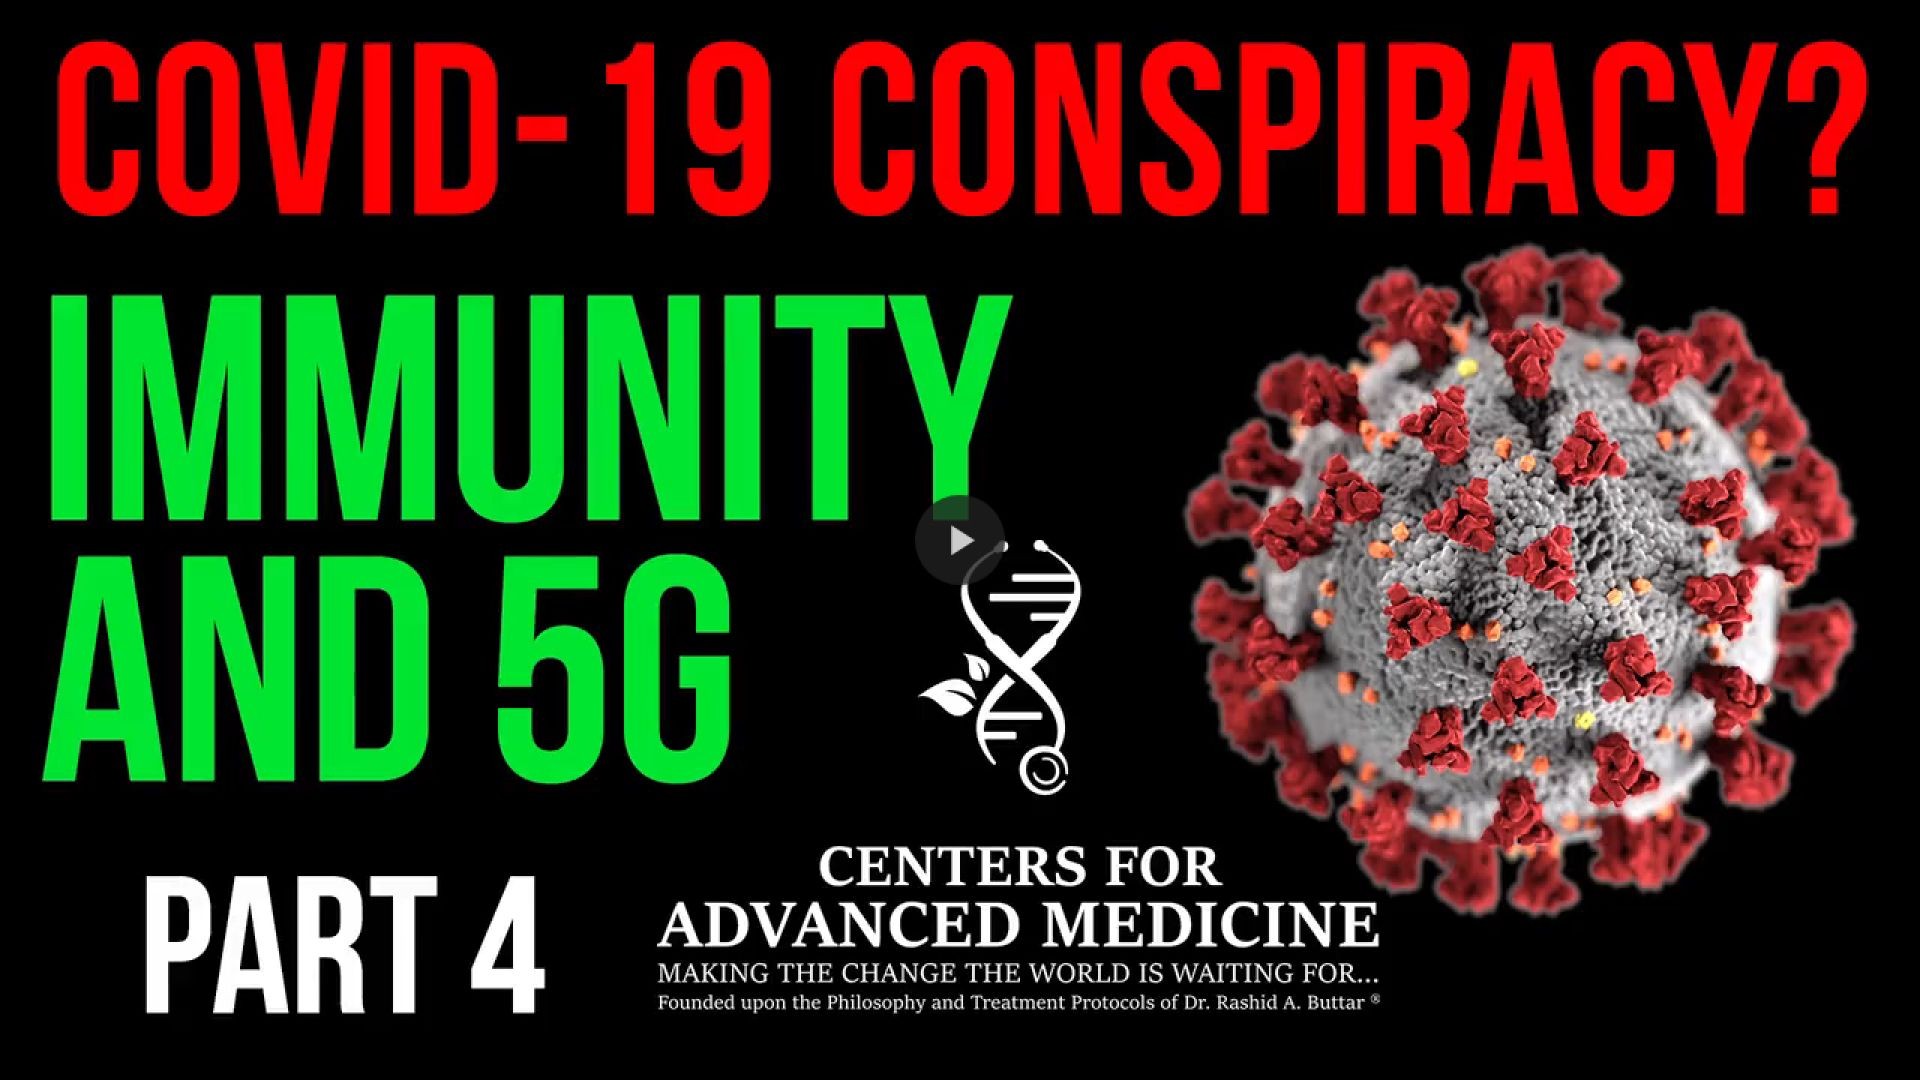 COVID-19 Conspiracy? - Video 4 - Dr.Buttar